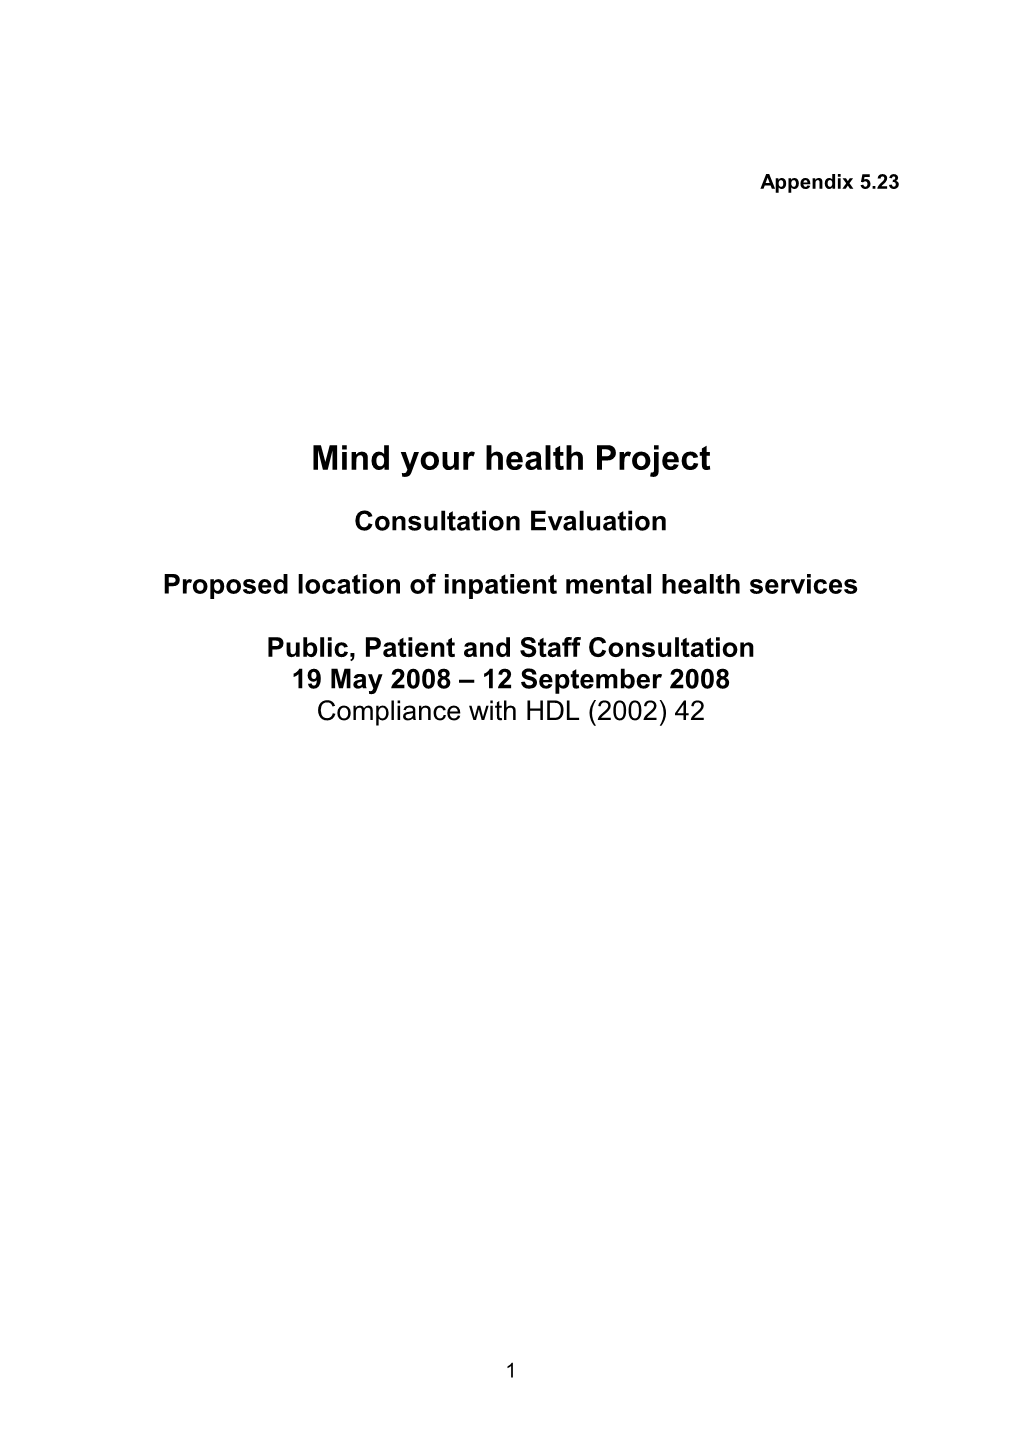 Mind Your Health Project